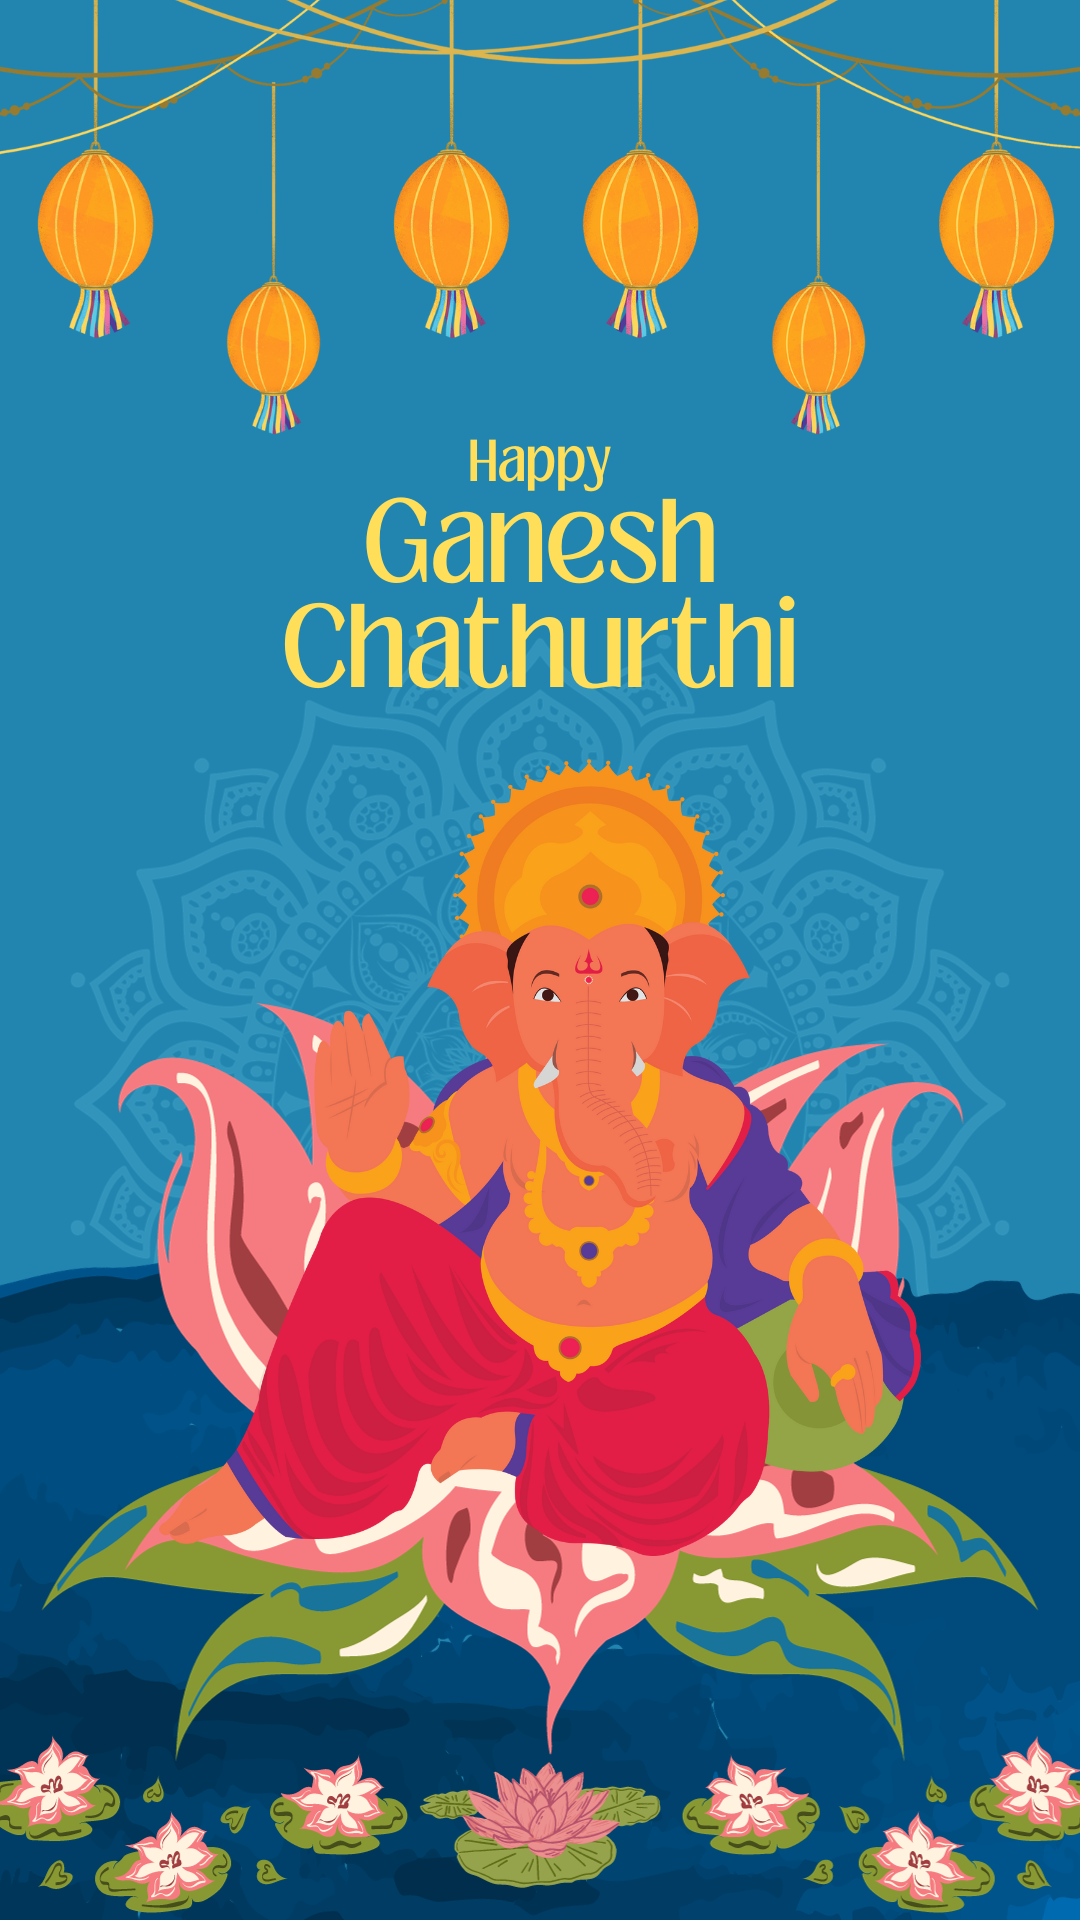 #{"id":1688,"_id":"61f3f785e0f744570541c409","name":"ganesh-chaturthi","count":27,"data":"{\"_id\":{\"$oid\":\"61f3f785e0f744570541c409\"},\"id\":\"960\",\"name\":\"ganesh-chaturthi\",\"created_at\":\"2021-09-08-21:13:25\",\"updated_at\":\"2021-09-08-21:13:25\",\"updatedAt\":{\"$date\":\"2022-01-28T14:33:44.935Z\"},\"count\":27}","deleted_at":null,"created_at":"2021-09-08T09:13:25.000000Z","updated_at":"2021-09-08T09:13:25.000000Z","merge_with":null,"pivot":{"taggable_id":2371,"tag_id":1688,"taggable_type":"App\\Models\\Status"}}, #{"id":2575,"_id":null,"name":"ganesh-chaturthi-2023","count":0,"data":null,"deleted_at":null,"created_at":"2023-09-17T04:05:29.000000Z","updated_at":"2023-09-17T04:05:29.000000Z","merge_with":null,"pivot":{"taggable_id":2371,"tag_id":2575,"taggable_type":"App\\Models\\Status"}}, #{"id":1665,"_id":"61f3f785e0f744570541c3f2","name":"ganesh-chaturthi-images","count":18,"data":"{\"_id\":{\"$oid\":\"61f3f785e0f744570541c3f2\"},\"id\":\"937\",\"name\":\"ganesh-chaturthi-images\",\"created_at\":\"2021-09-08-21:08:14\",\"updated_at\":\"2021-09-08-21:08:14\",\"updatedAt\":{\"$date\":\"2022-01-28T14:33:44.935Z\"},\"count\":18}","deleted_at":null,"created_at":"2021-09-08T09:08:14.000000Z","updated_at":"2021-09-08T09:08:14.000000Z","merge_with":null,"pivot":{"taggable_id":2371,"tag_id":1665,"taggable_type":"App\\Models\\Status"}}, #{"id":1668,"_id":"61f3f785e0f744570541c3f5","name":"ganesh-chaturthi-pics","count":18,"data":"{\"_id\":{\"$oid\":\"61f3f785e0f744570541c3f5\"},\"id\":\"940\",\"name\":\"ganesh-chaturthi-pics\",\"created_at\":\"2021-09-08-21:08:14\",\"updated_at\":\"2021-09-08-21:08:14\",\"updatedAt\":{\"$date\":\"2022-01-28T14:33:44.935Z\"},\"count\":18}","deleted_at":null,"created_at":"2021-09-08T09:08:14.000000Z","updated_at":"2021-09-08T09:08:14.000000Z","merge_with":null,"pivot":{"taggable_id":2371,"tag_id":1668,"taggable_type":"App\\Models\\Status"}}, #{"id":1667,"_id":"61f3f785e0f744570541c3f4","name":"ganesh-chaturthi-pictures","count":18,"data":"{\"_id\":{\"$oid\":\"61f3f785e0f744570541c3f4\"},\"id\":\"939\",\"name\":\"ganesh-chaturthi-pictures\",\"created_at\":\"2021-09-08-21:08:14\",\"updated_at\":\"2021-09-08-21:08:14\",\"updatedAt\":{\"$date\":\"2022-01-28T14:33:44.935Z\"},\"count\":18}","deleted_at":null,"created_at":"2021-09-08T09:08:14.000000Z","updated_at":"2021-09-08T09:08:14.000000Z","merge_with":null,"pivot":{"taggable_id":2371,"tag_id":1667,"taggable_type":"App\\Models\\Status"}}, #{"id":1677,"_id":"61f3f785e0f744570541c3fe","name":"ganesh-chaturthi-quotes","count":12,"data":"{\"_id\":{\"$oid\":\"61f3f785e0f744570541c3fe\"},\"id\":\"949\",\"name\":\"ganesh-chaturthi-quotes\",\"created_at\":\"2021-09-08-21:08:40\",\"updated_at\":\"2021-09-08-21:08:40\",\"updatedAt\":{\"$date\":\"2022-01-28T14:33:44.935Z\"},\"count\":12}","deleted_at":null,"created_at":"2021-09-08T09:08:40.000000Z","updated_at":"2021-09-08T09:08:40.000000Z","merge_with":null,"pivot":{"taggable_id":2371,"tag_id":1677,"taggable_type":"App\\Models\\Status"}}, #{"id":1674,"_id":"61f3f785e0f744570541c3fb","name":"ganesh-chaturthi-shayari","count":12,"data":"{\"_id\":{\"$oid\":\"61f3f785e0f744570541c3fb\"},\"id\":\"946\",\"name\":\"ganesh-chaturthi-shayari\",\"created_at\":\"2021-09-08-21:08:40\",\"updated_at\":\"2021-09-08-21:08:40\",\"updatedAt\":{\"$date\":\"2022-01-28T14:33:44.935Z\"},\"count\":12}","deleted_at":null,"created_at":"2021-09-08T09:08:40.000000Z","updated_at":"2021-09-08T09:08:40.000000Z","merge_with":null,"pivot":{"taggable_id":2371,"tag_id":1674,"taggable_type":"App\\Models\\Status"}}, #{"id":1678,"_id":"61f3f785e0f744570541c3ff","name":"ganesh-chaturthi-status","count":12,"data":"{\"_id\":{\"$oid\":\"61f3f785e0f744570541c3ff\"},\"id\":\"950\",\"name\":\"ganesh-chaturthi-status\",\"created_at\":\"2021-09-08-21:08:40\",\"updated_at\":\"2021-09-08-21:08:40\",\"updatedAt\":{\"$date\":\"2022-01-28T14:33:44.935Z\"},\"count\":12}","deleted_at":null,"created_at":"2021-09-08T09:08:40.000000Z","updated_at":"2021-09-08T09:08:40.000000Z","merge_with":null,"pivot":{"taggable_id":2371,"tag_id":1678,"taggable_type":"App\\Models\\Status"}}